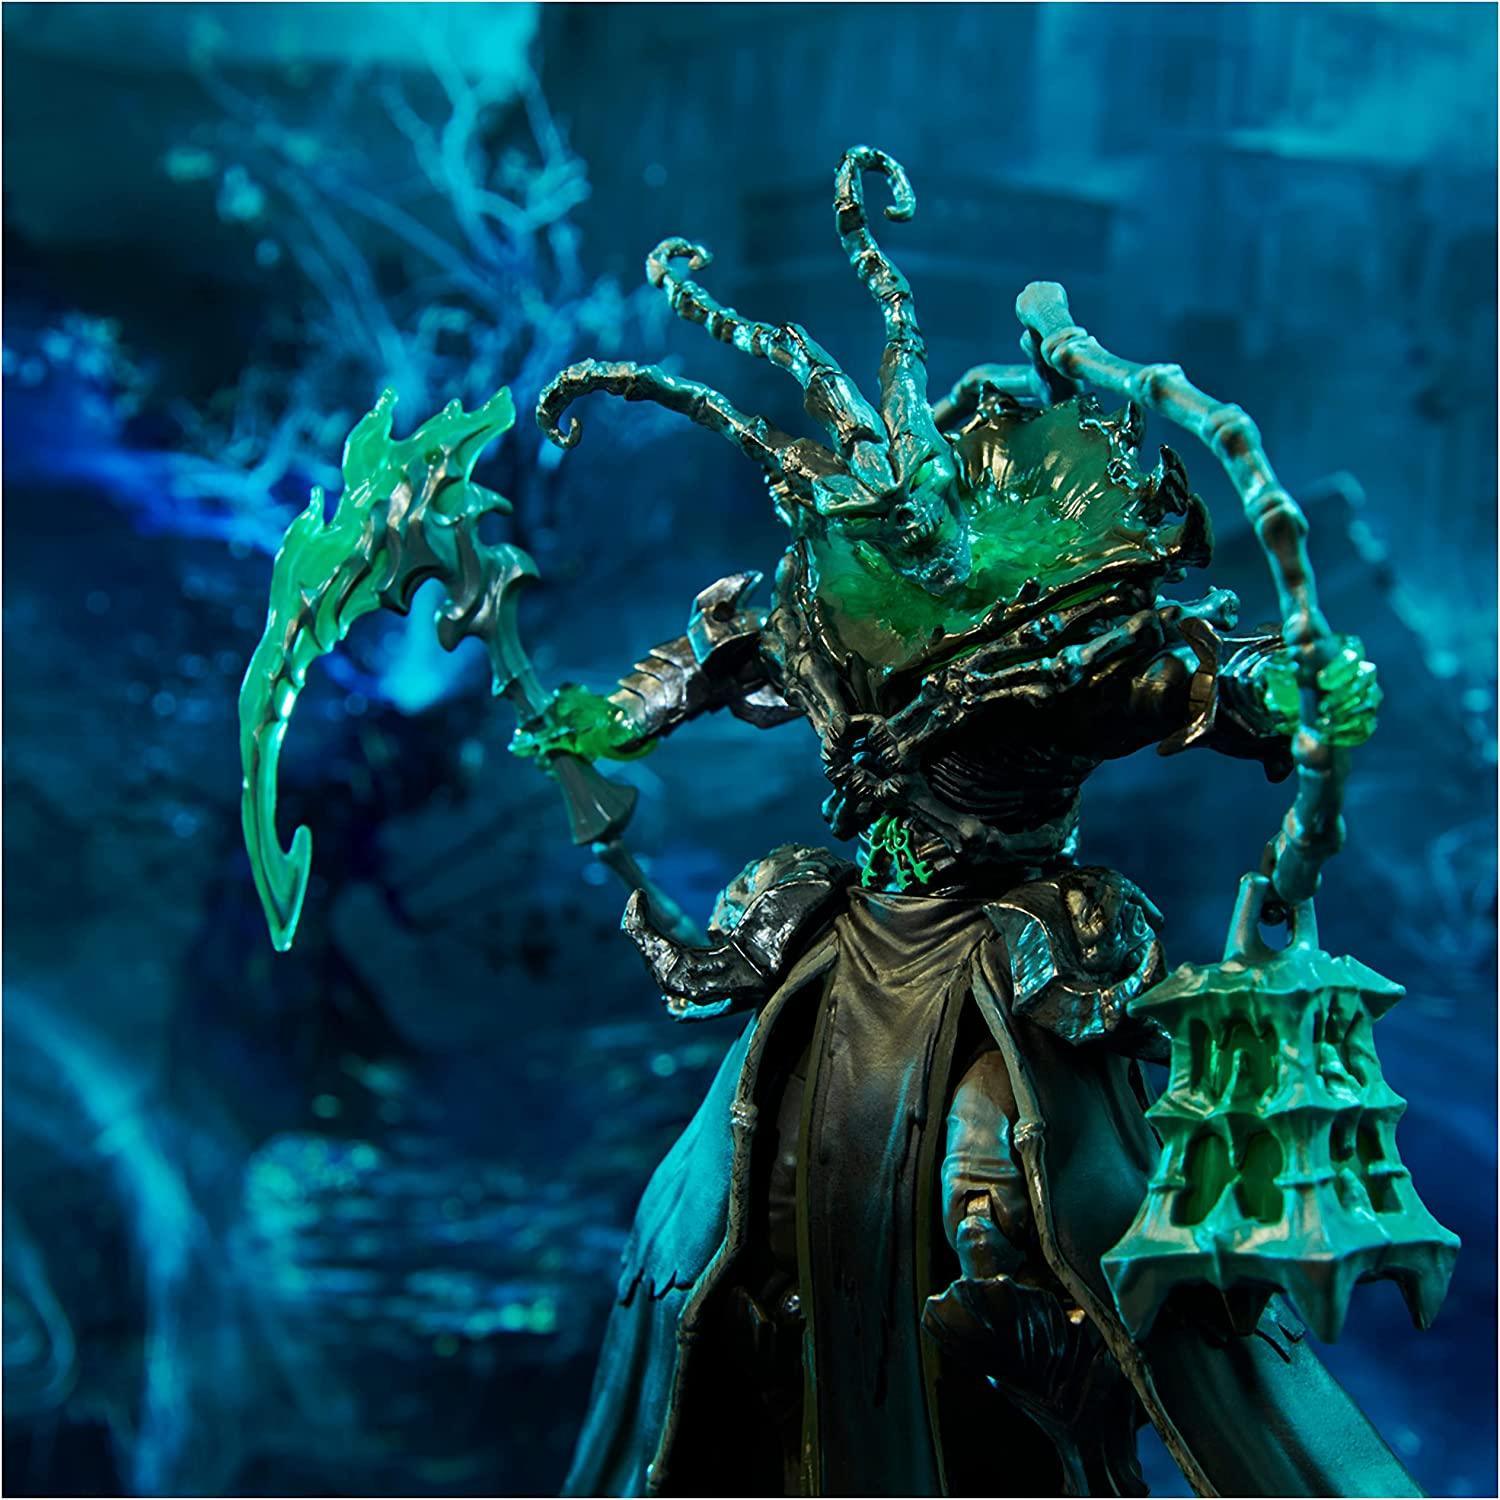 League of Legends, 6-Inch Thresh Collectible Figure w/ Premium Details and 2 Accessories - BumbleToys - 5-7 Years, Boys, Figures, Heroes, LEAGUE OF LEGENDS, Pre-Order